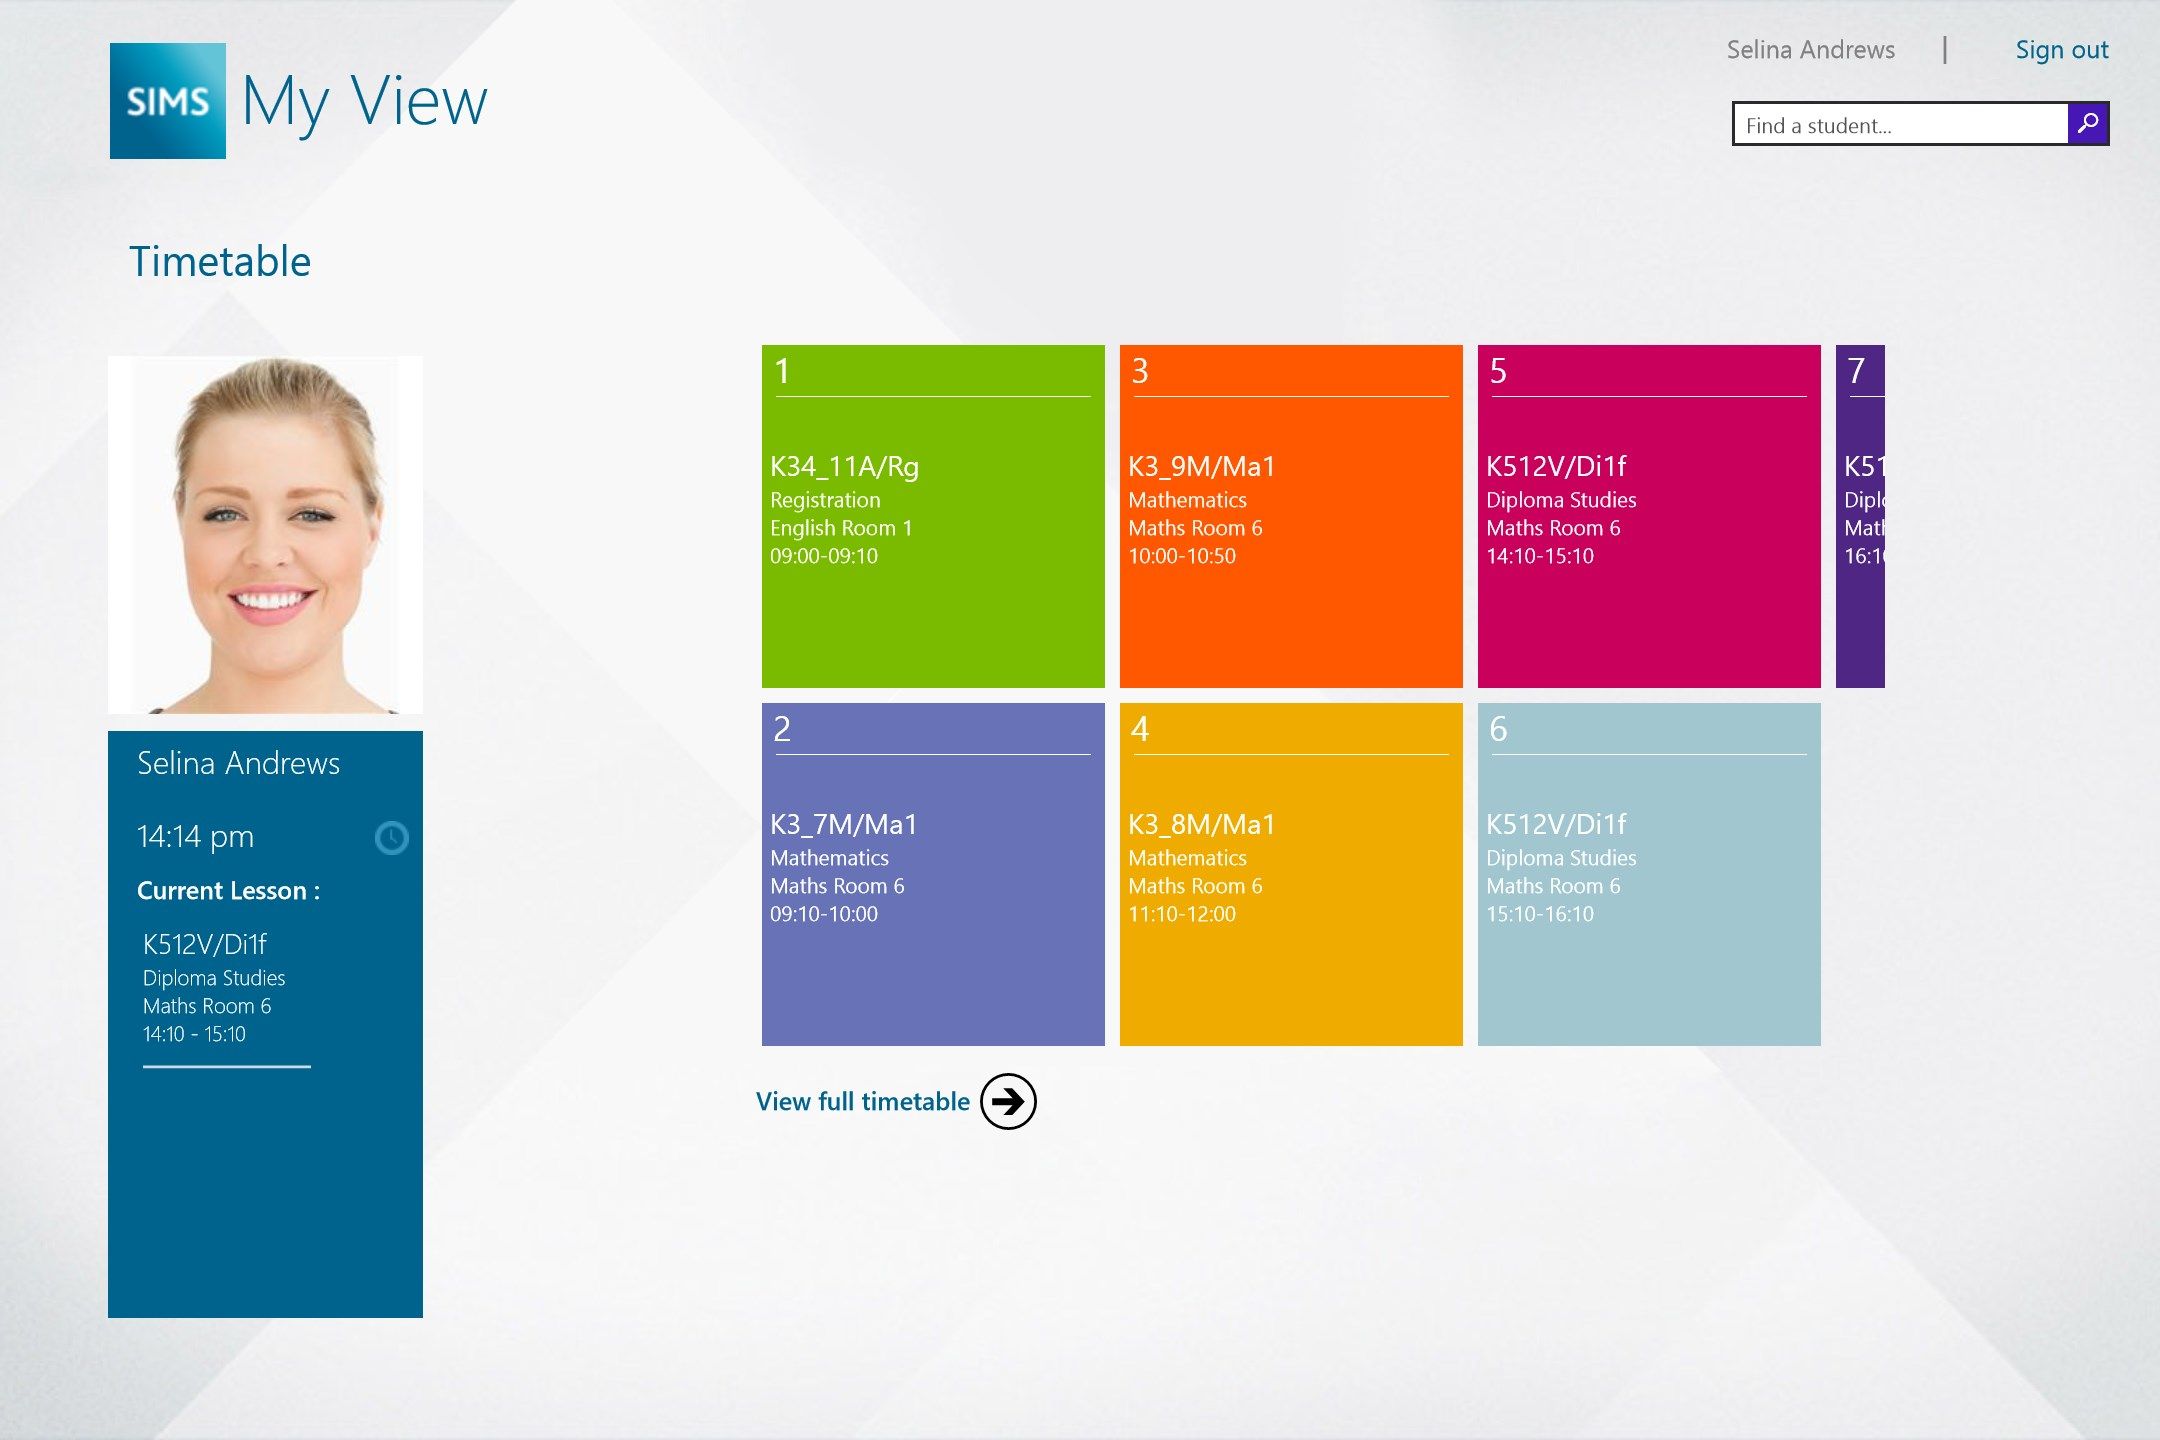 My View – the teacher hub screen allows quick-view of today’s lessons and the current lesson in progress